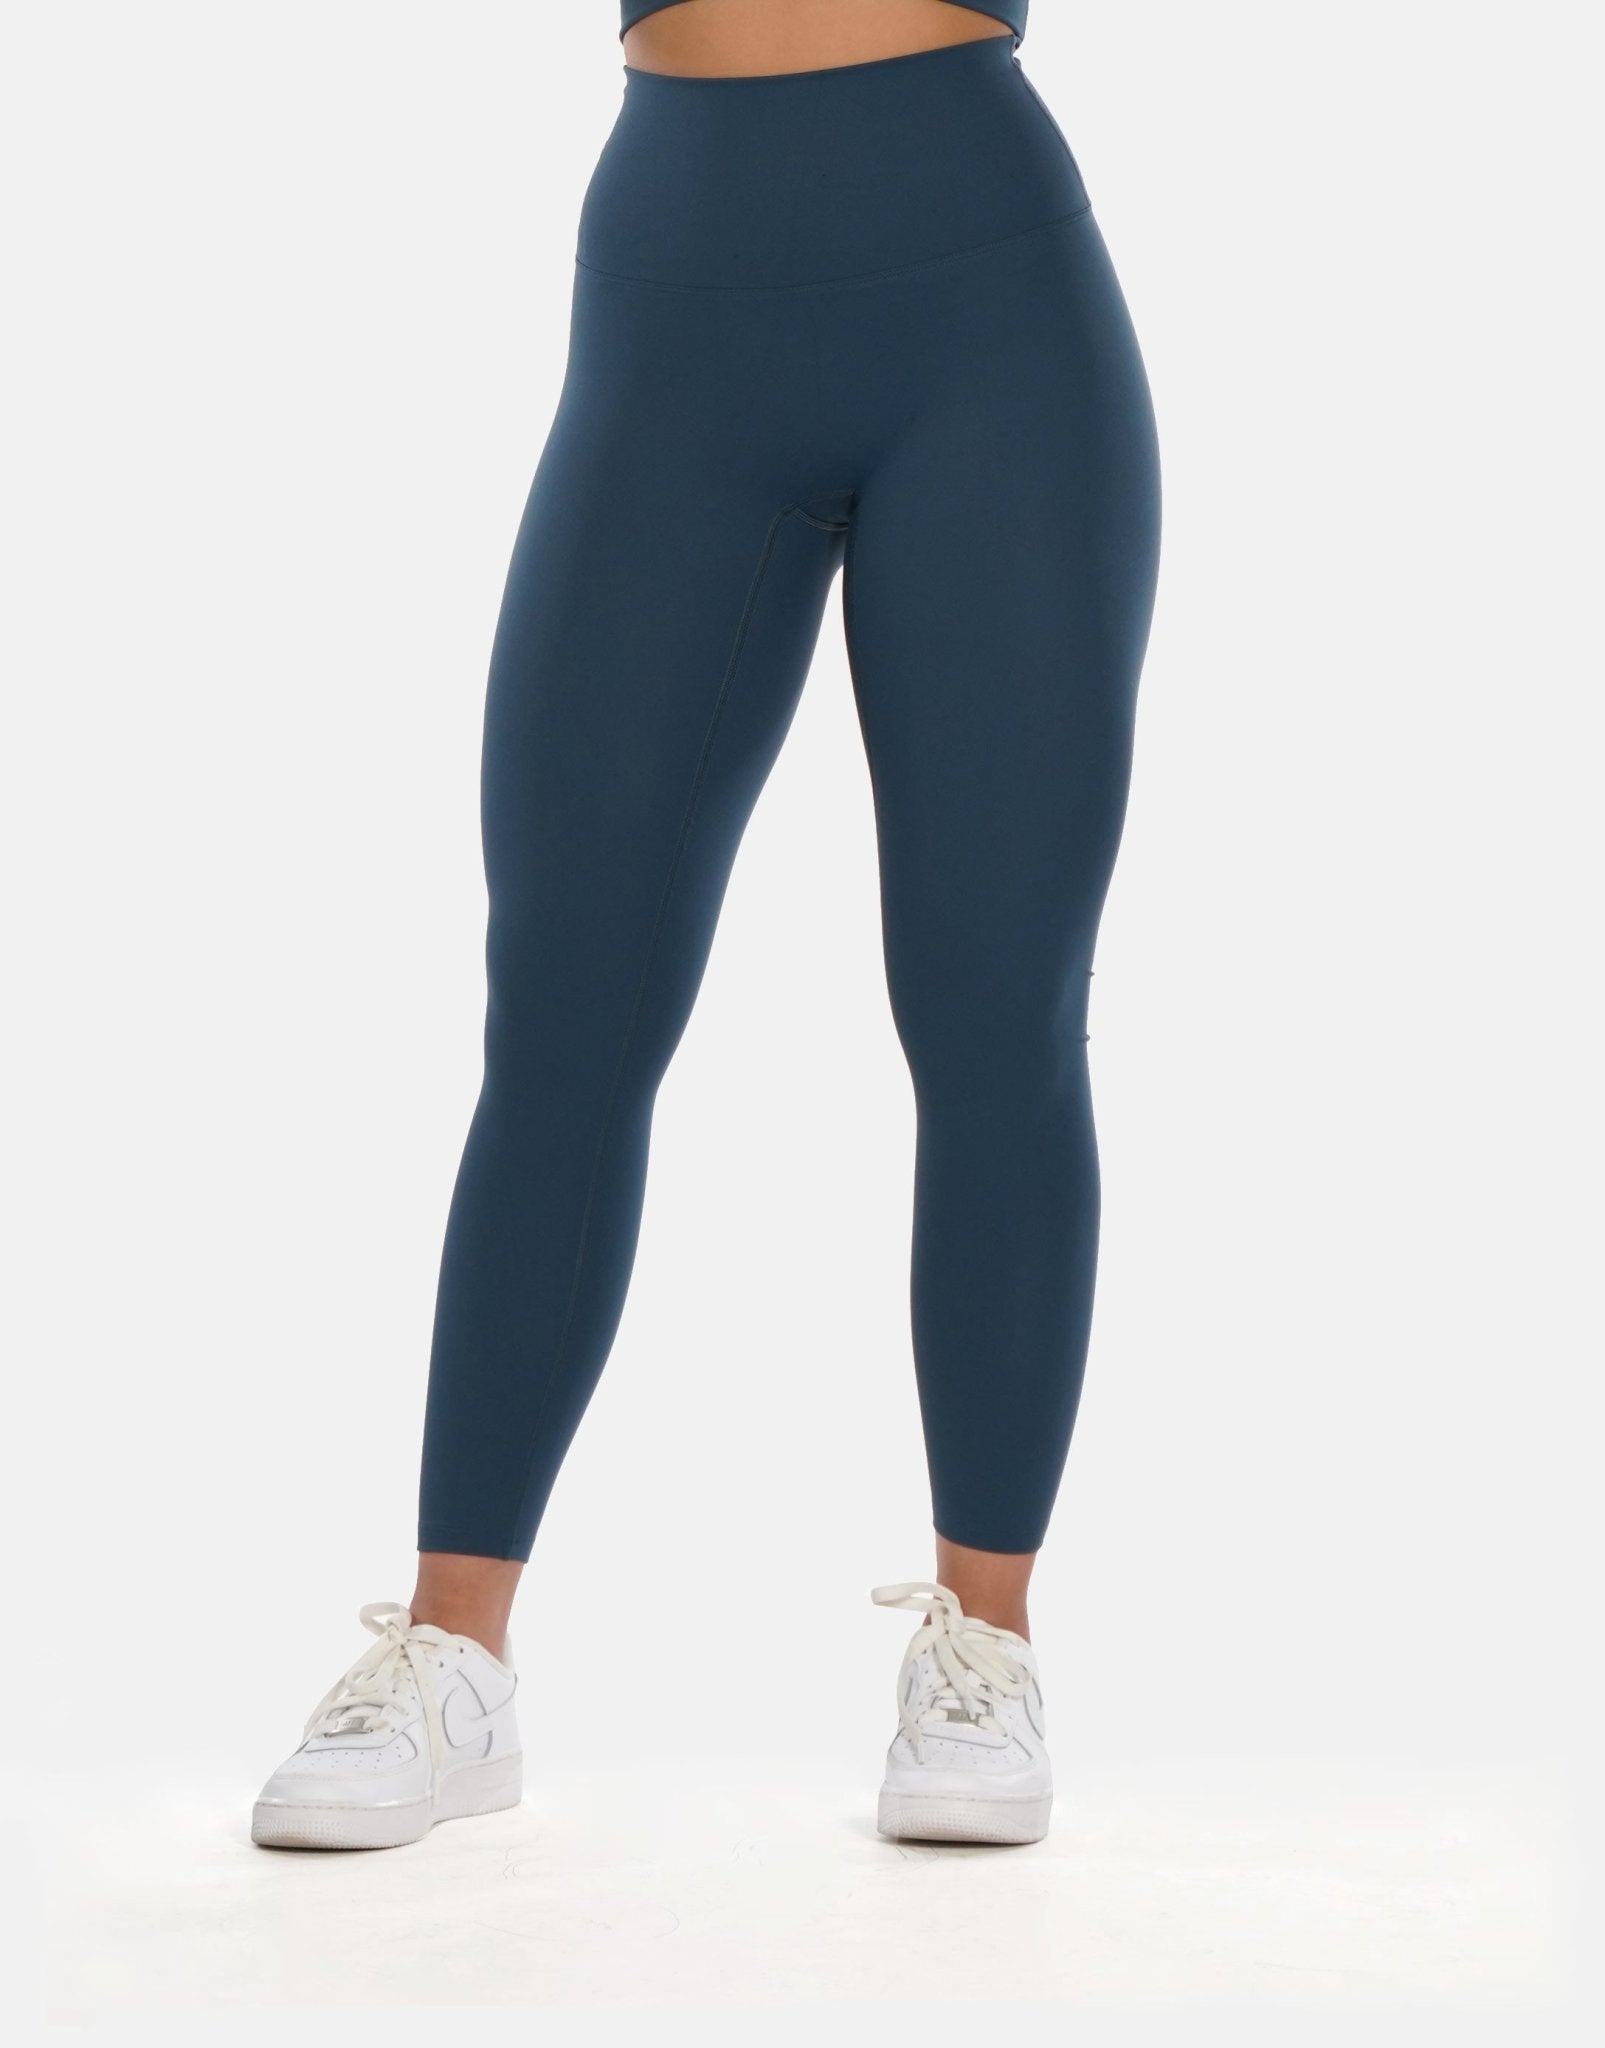 Under Armour Meridian Leggings (Black) Small - Central Sports